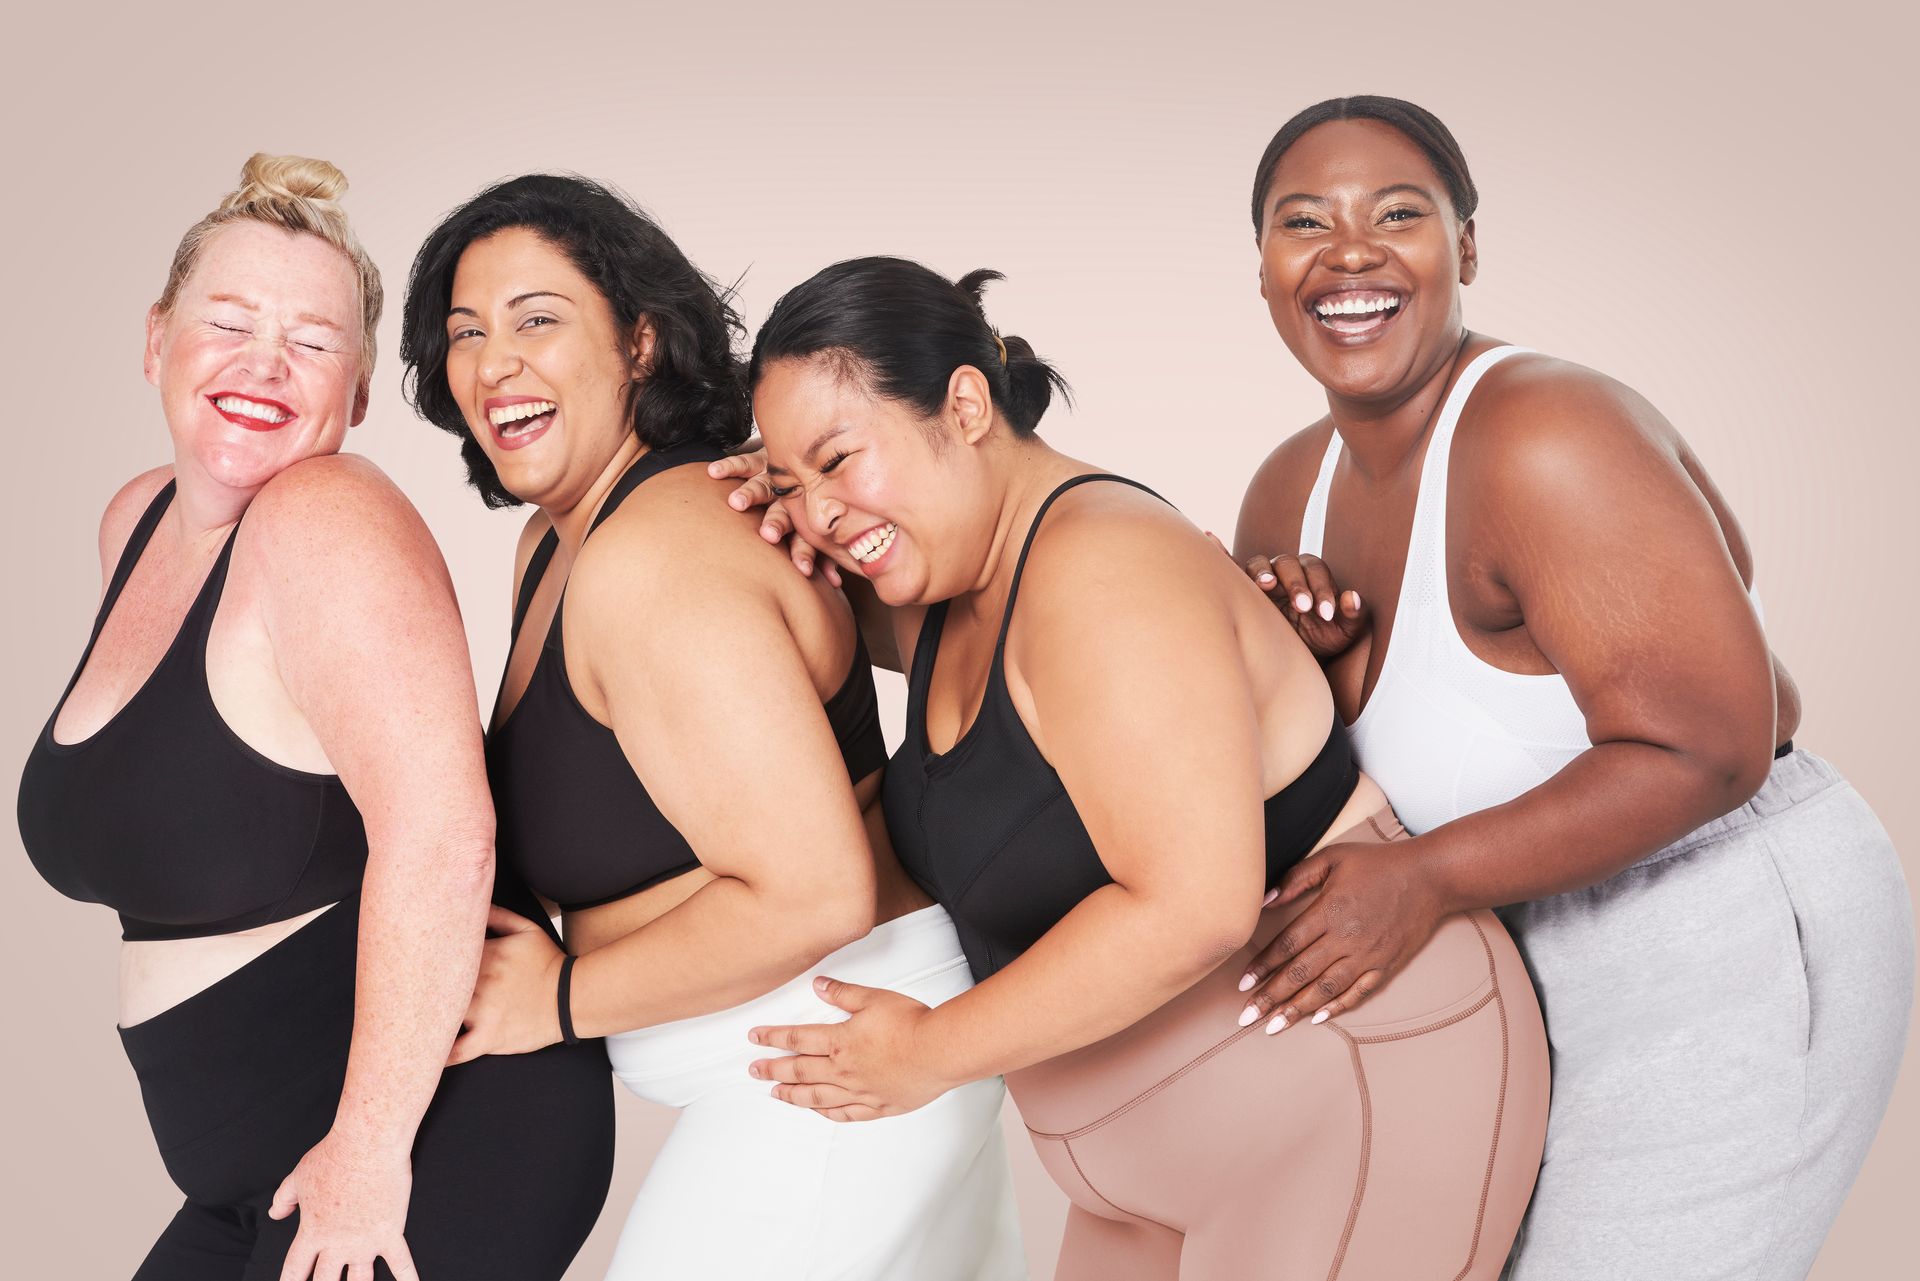 laughing women with excess weight in sportswear